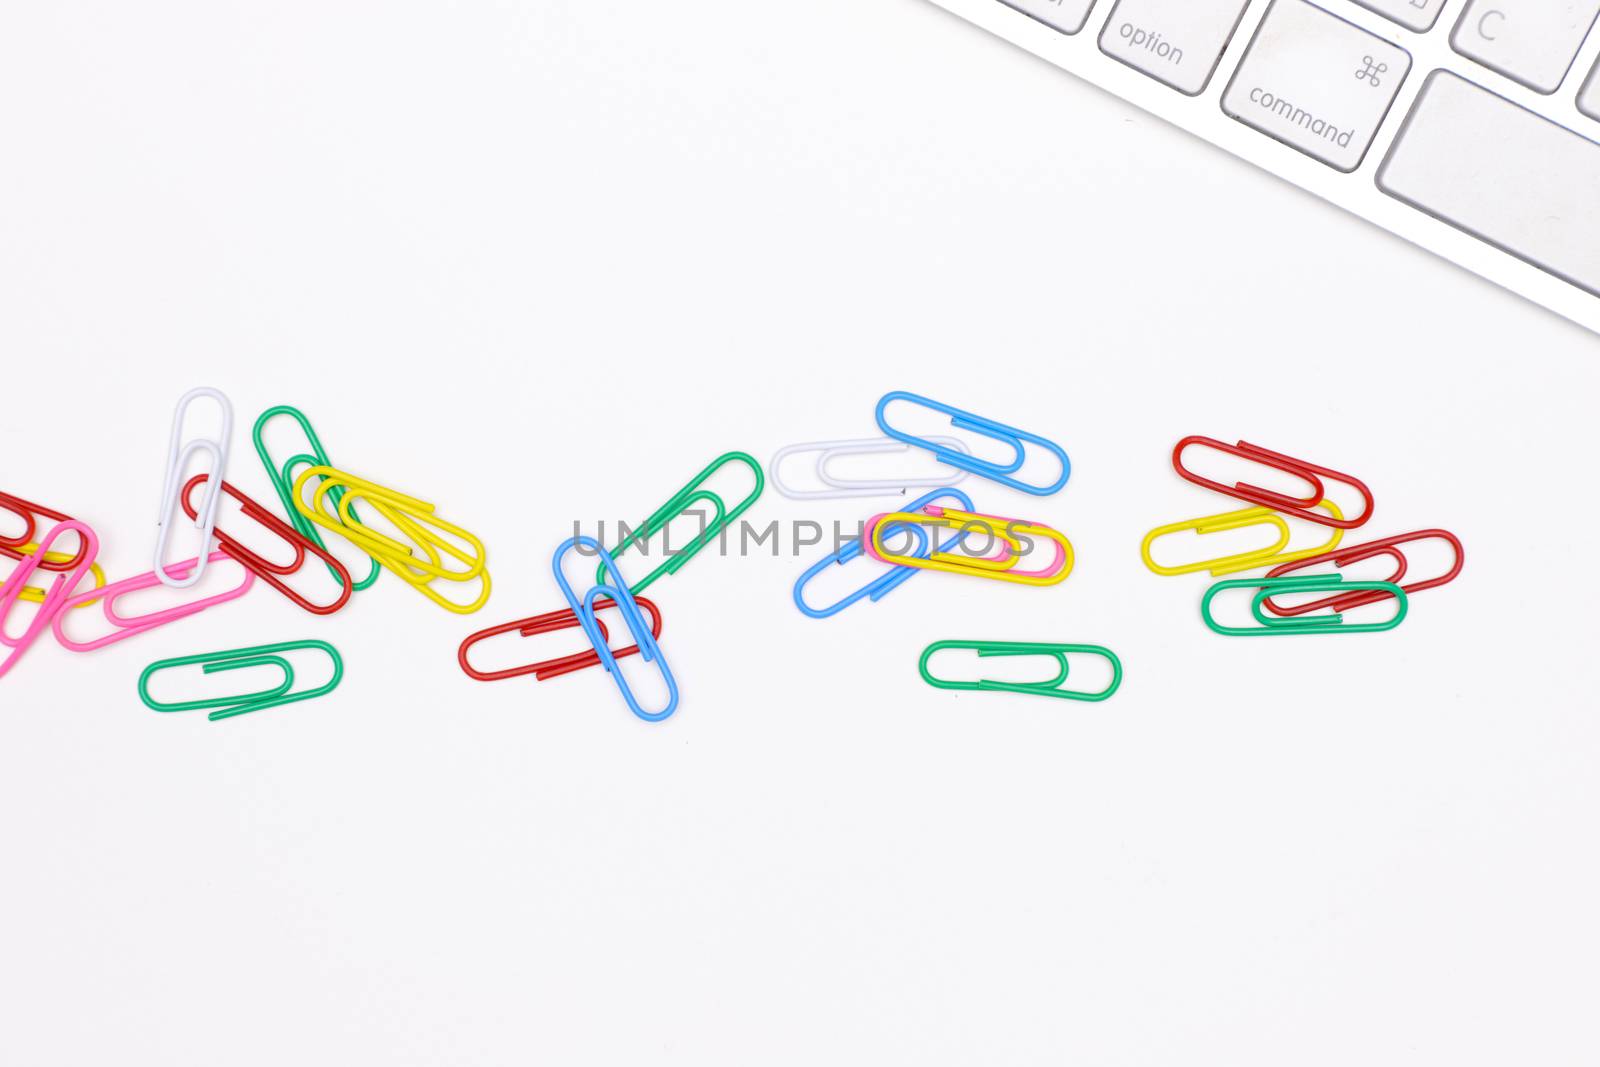 colorful paper clips on an office desk with a white keyboard